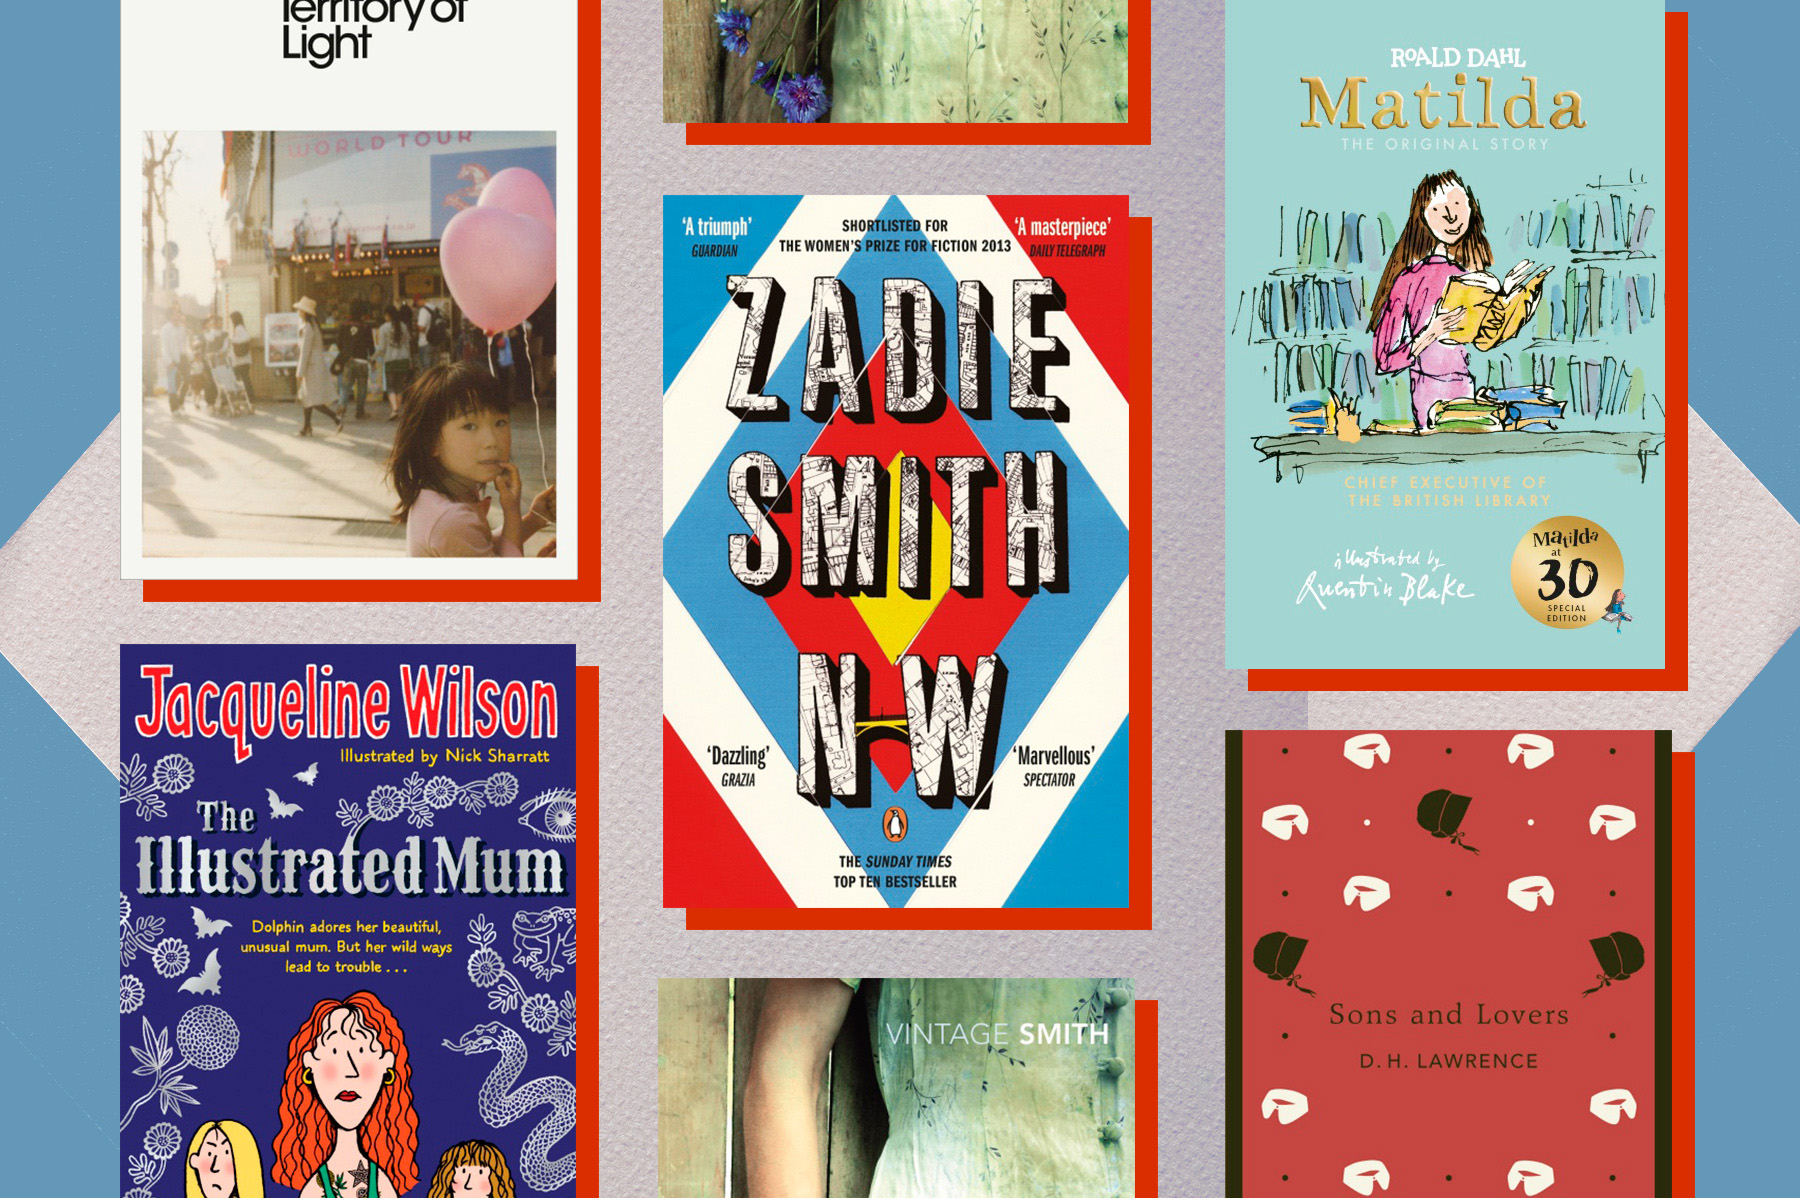 Book covers for Territory of Light, The Illustrated Mum, NW, Matilda and Sons and Lovers in a collage.